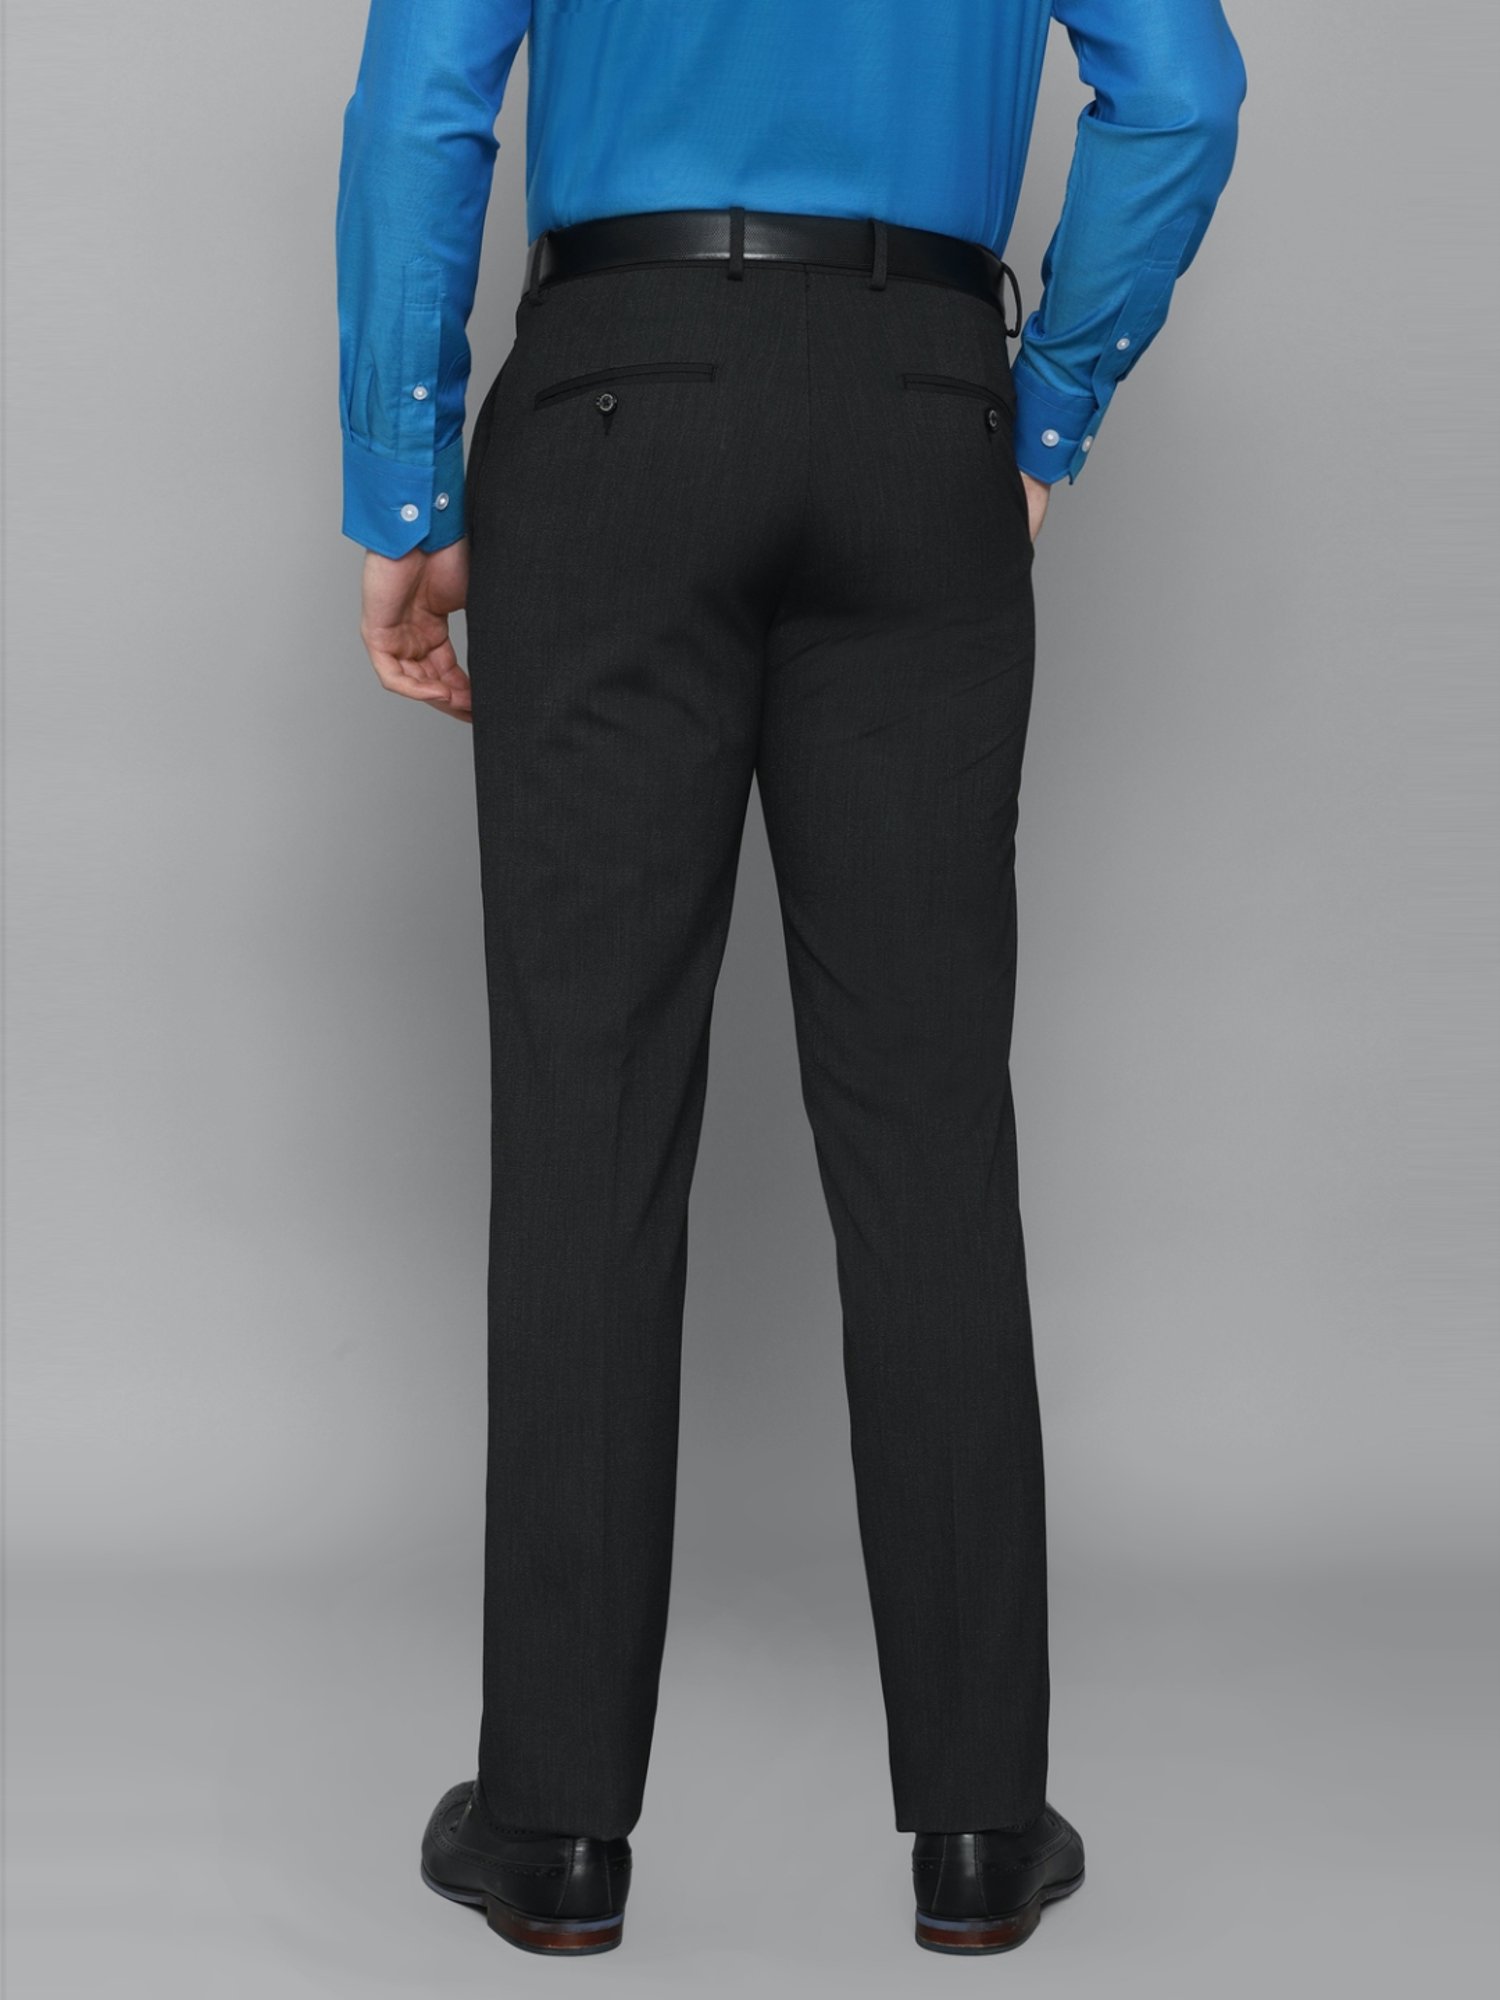 Buy Louis Philippe Black Trousers Online  651880  Louis Philippe